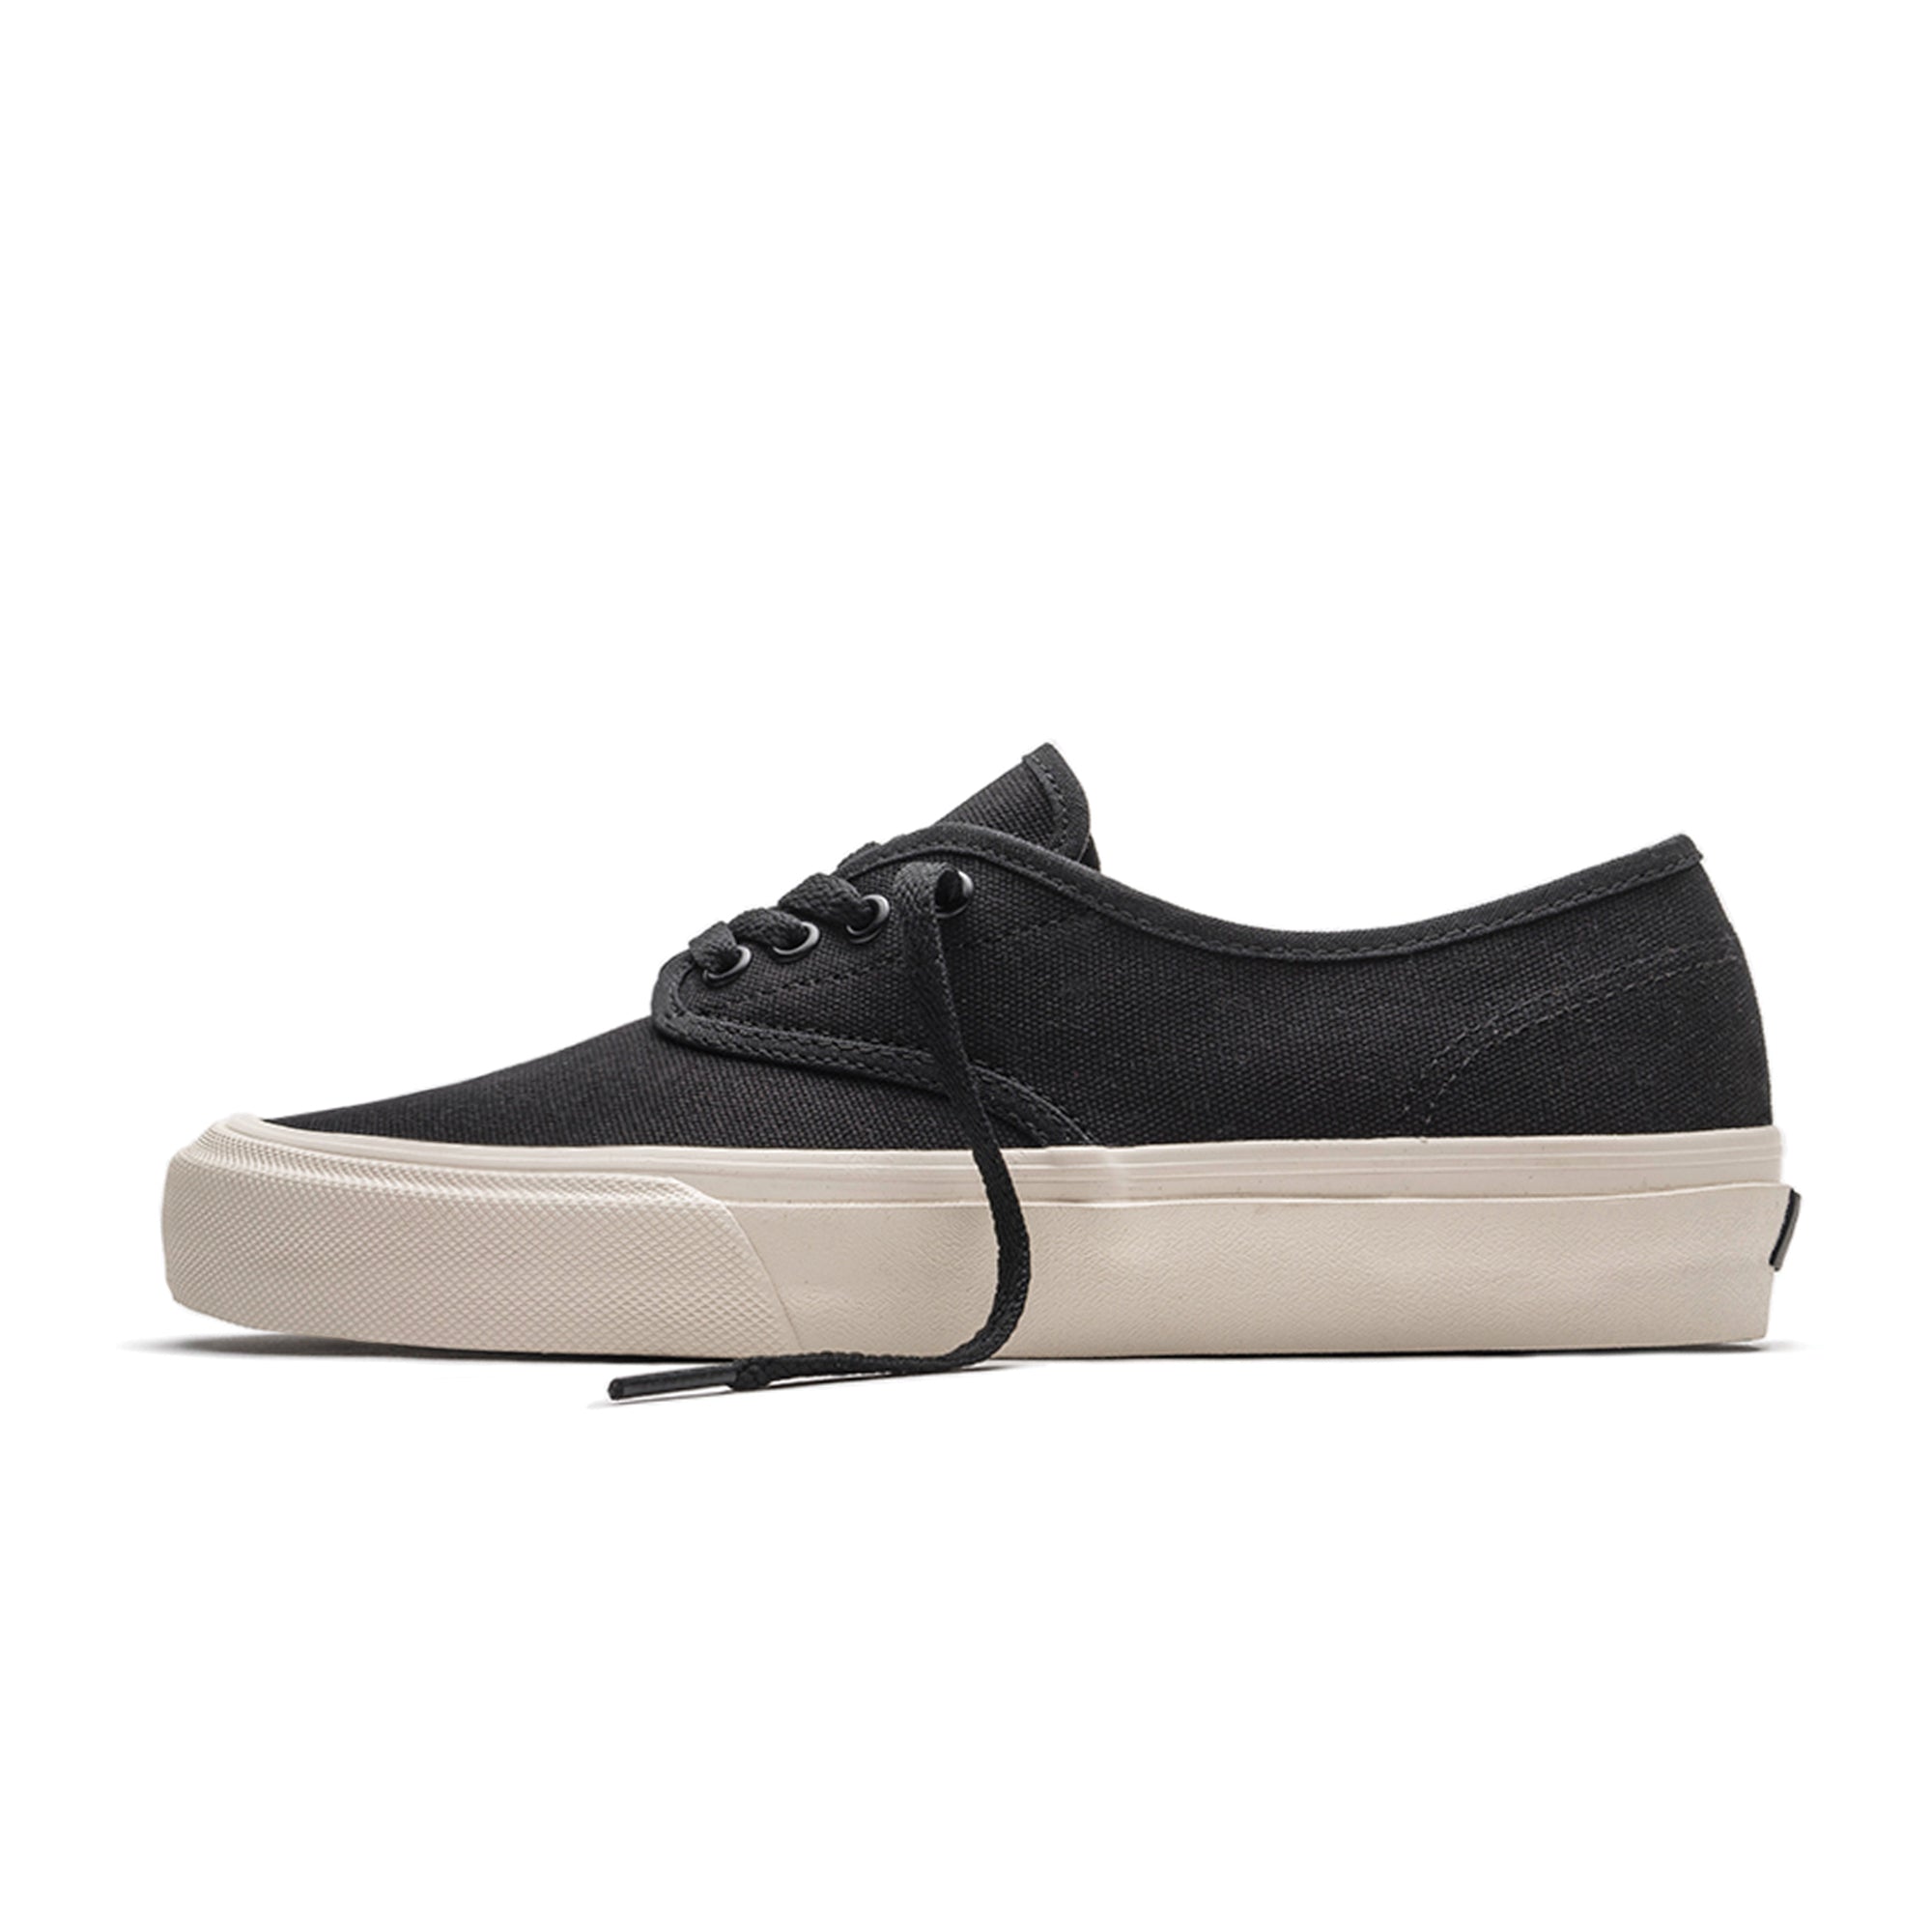 GOWER - BLACK | SIDE VIEW